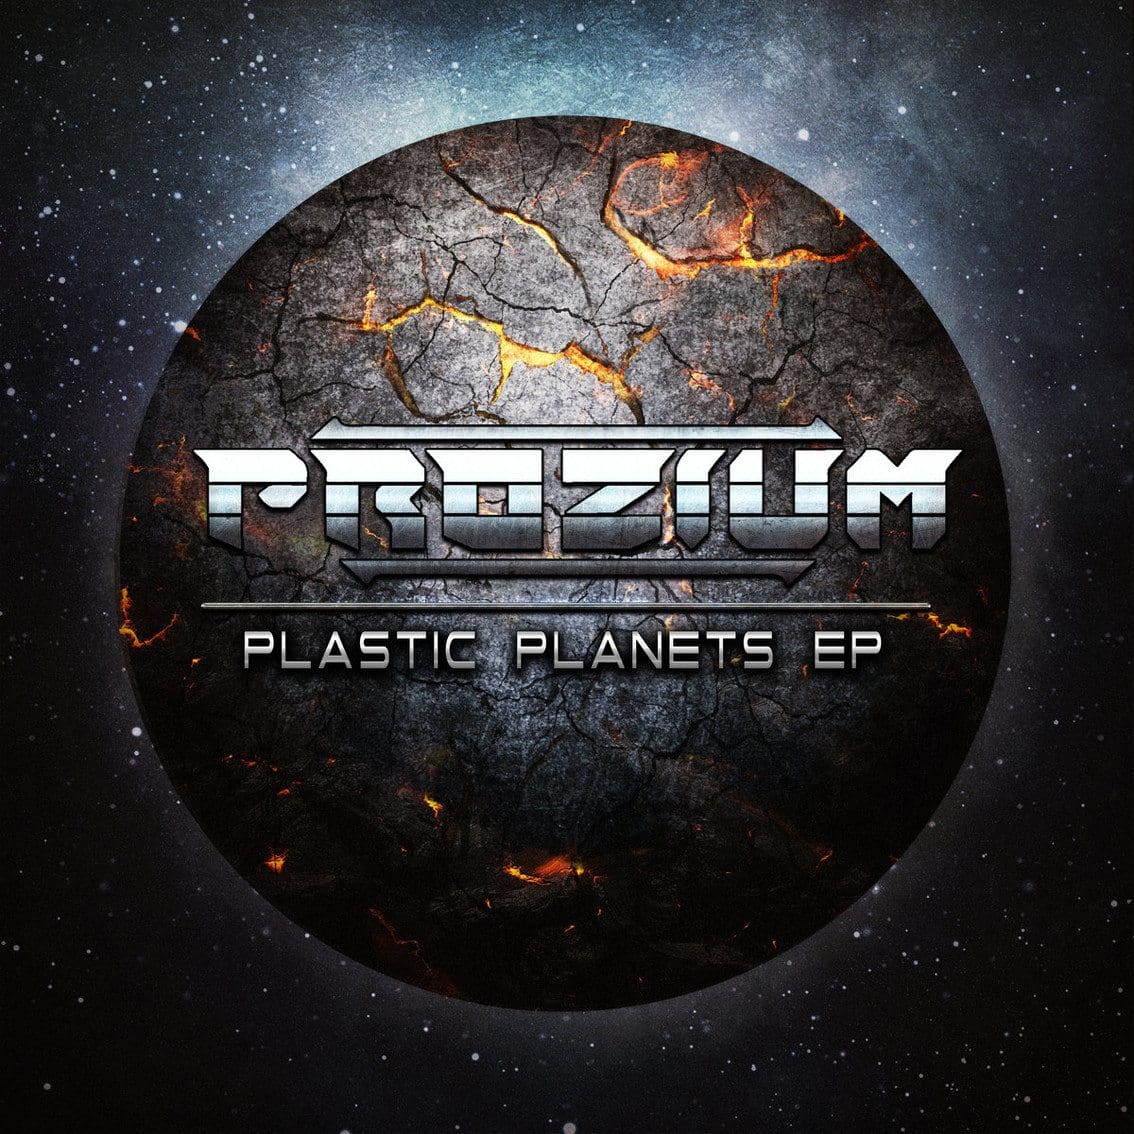 Prozium launches debut single, the electro infested dubstep 'Plastic Planets' 7-tracker - listen here